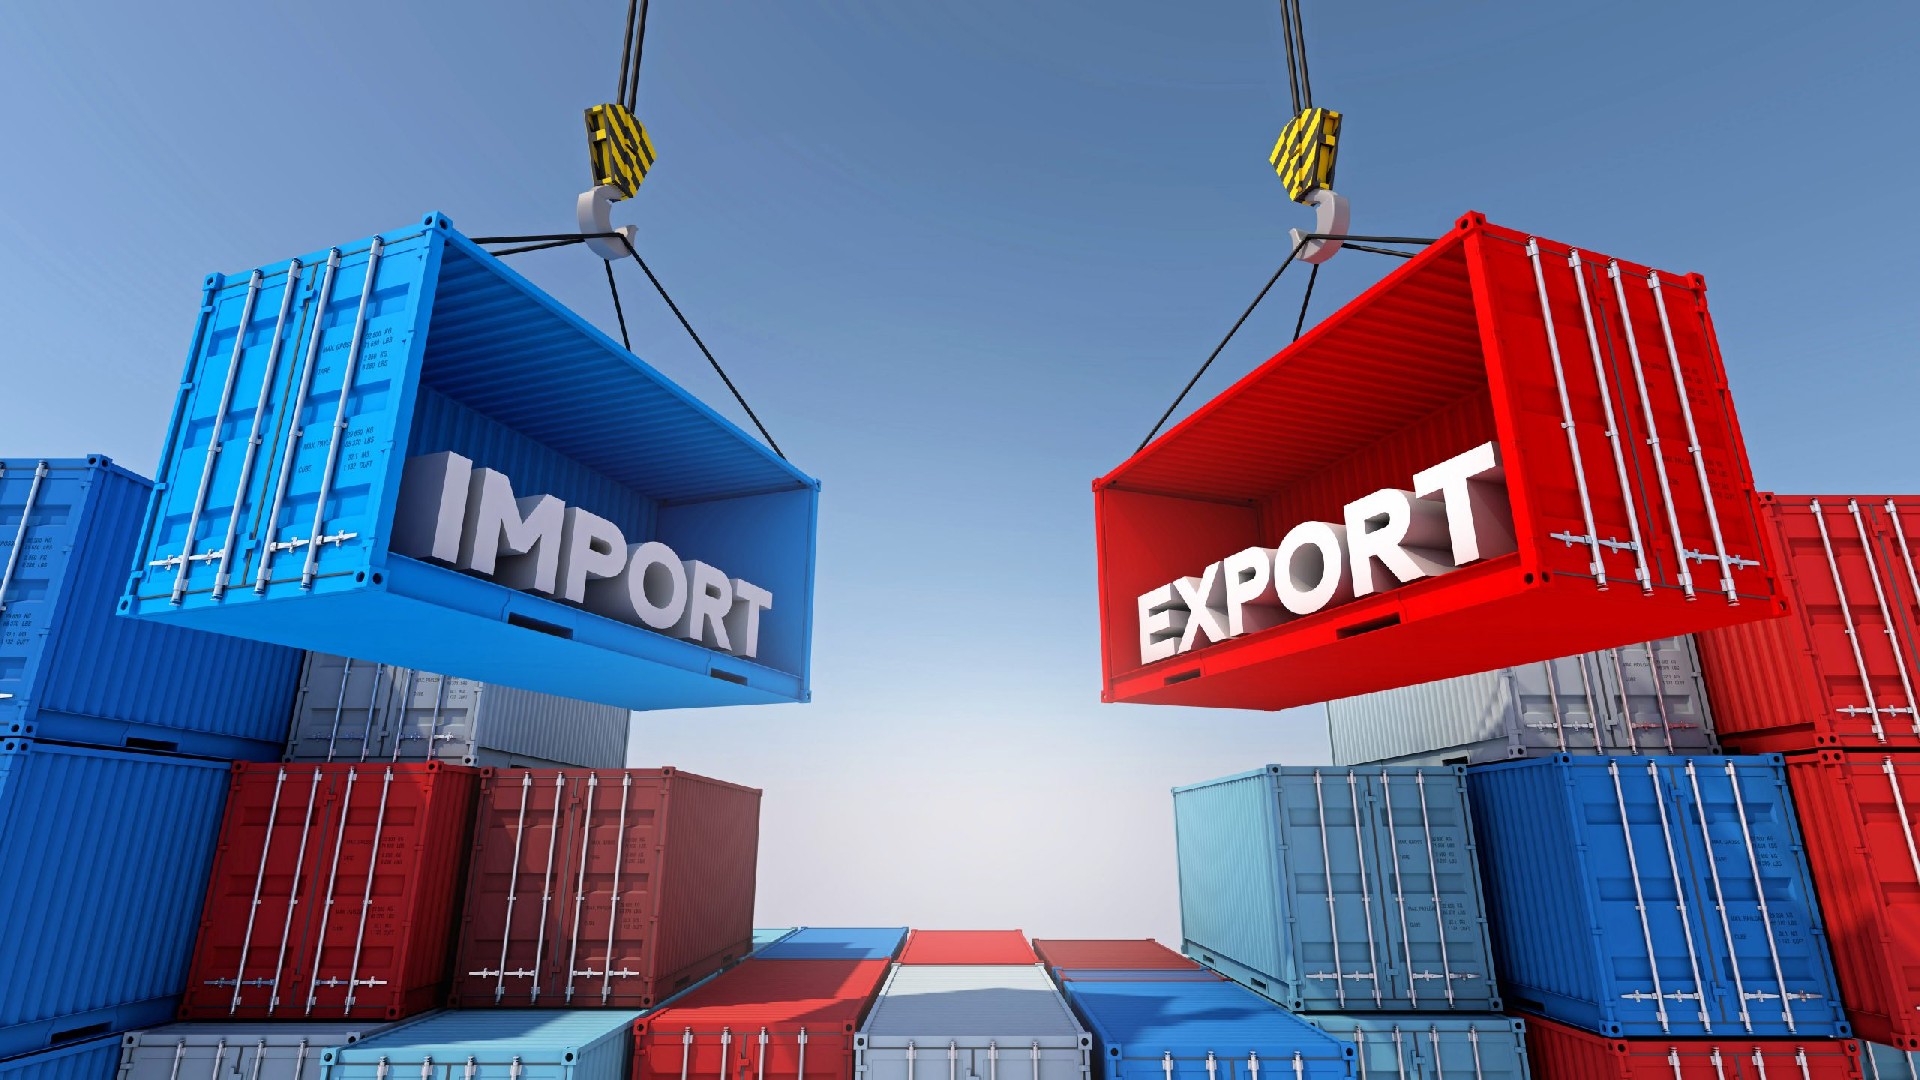 container-cargo-import-export-business-logistic-3d-rendering-scaled.jpg